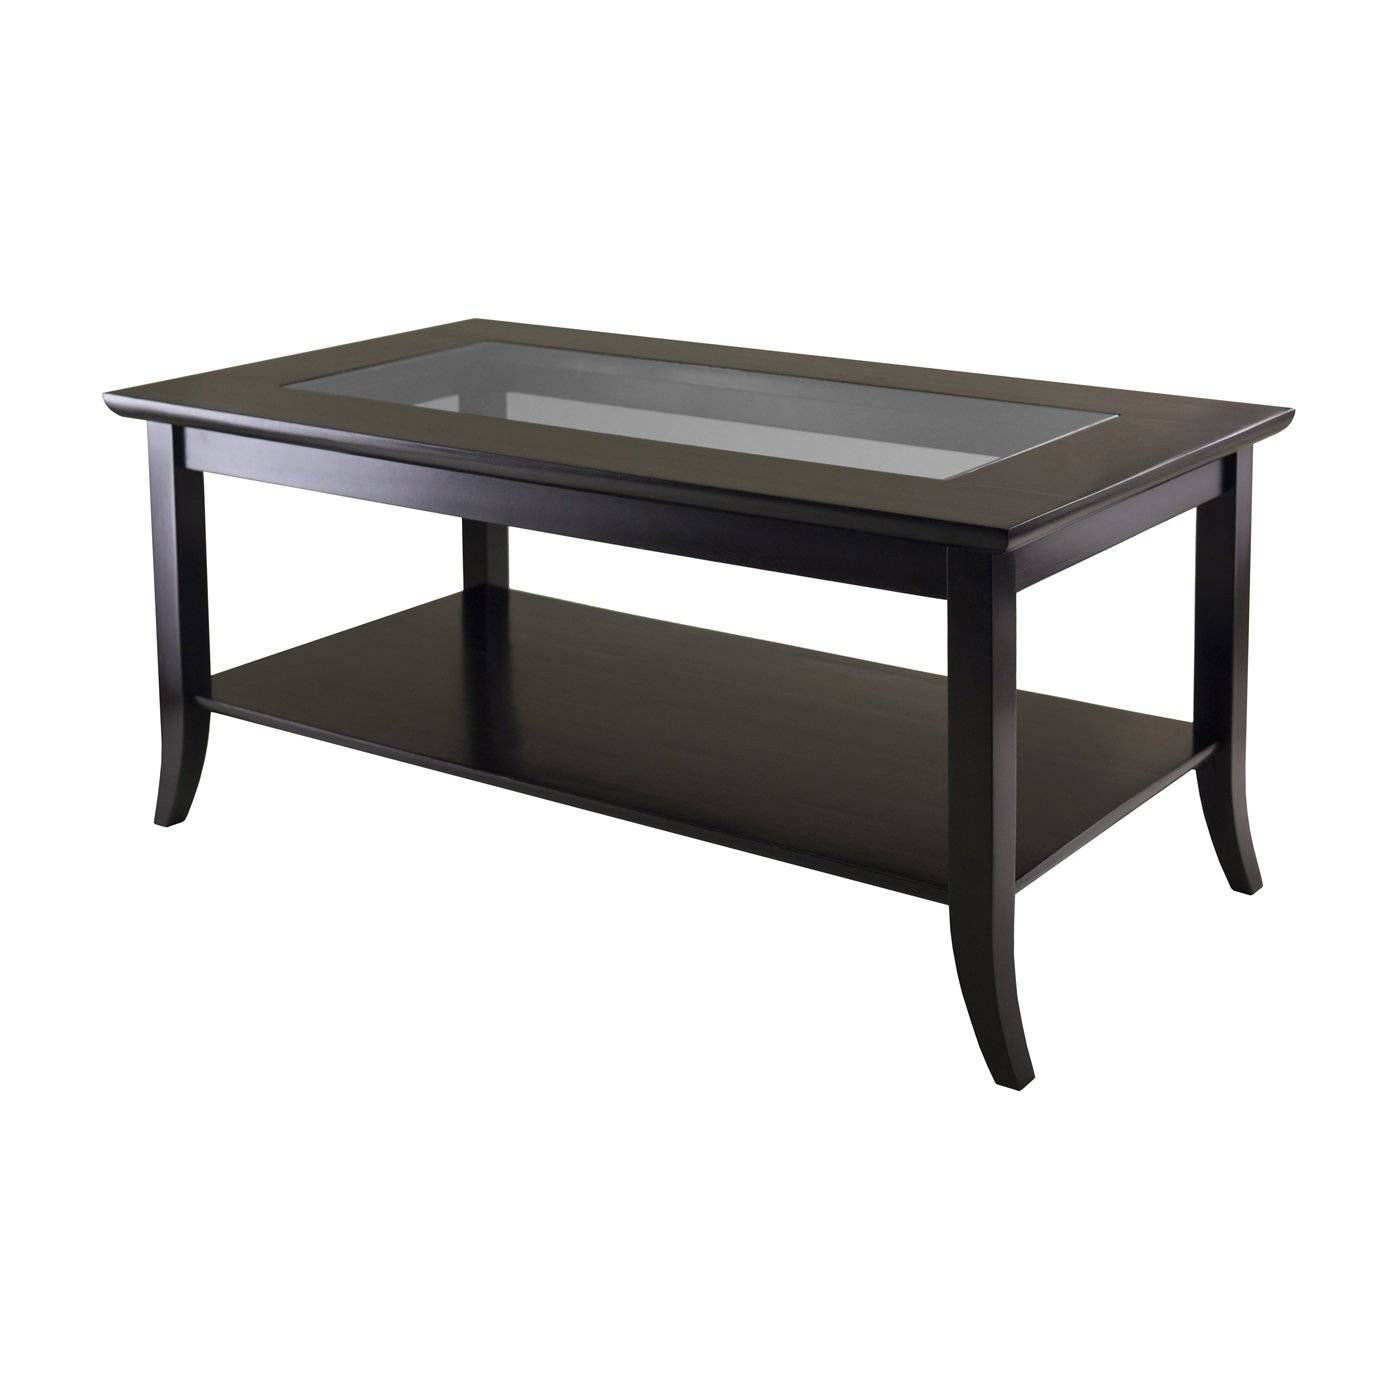 For Best Glass Top Coffee Table Best Glass Top Coffee Table Glass Intended For Glass Top Display Coffee Tables With Drawers (View 27 of 30)